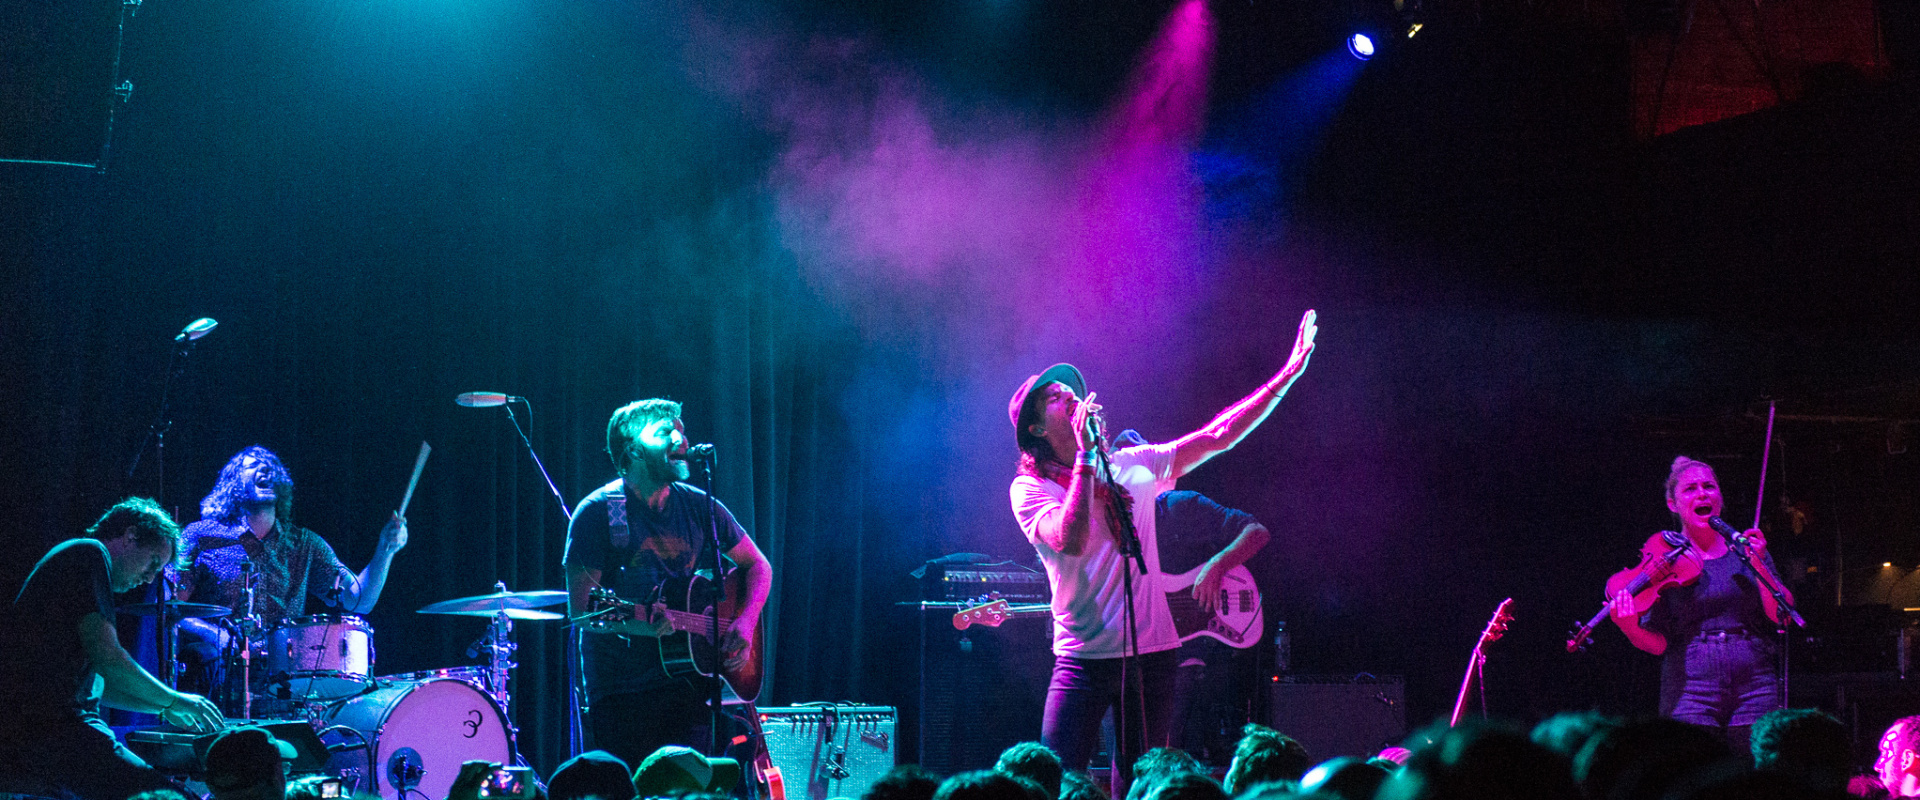 The Best Live Music Venues in Brooklyn, NY - An Expert's Guide